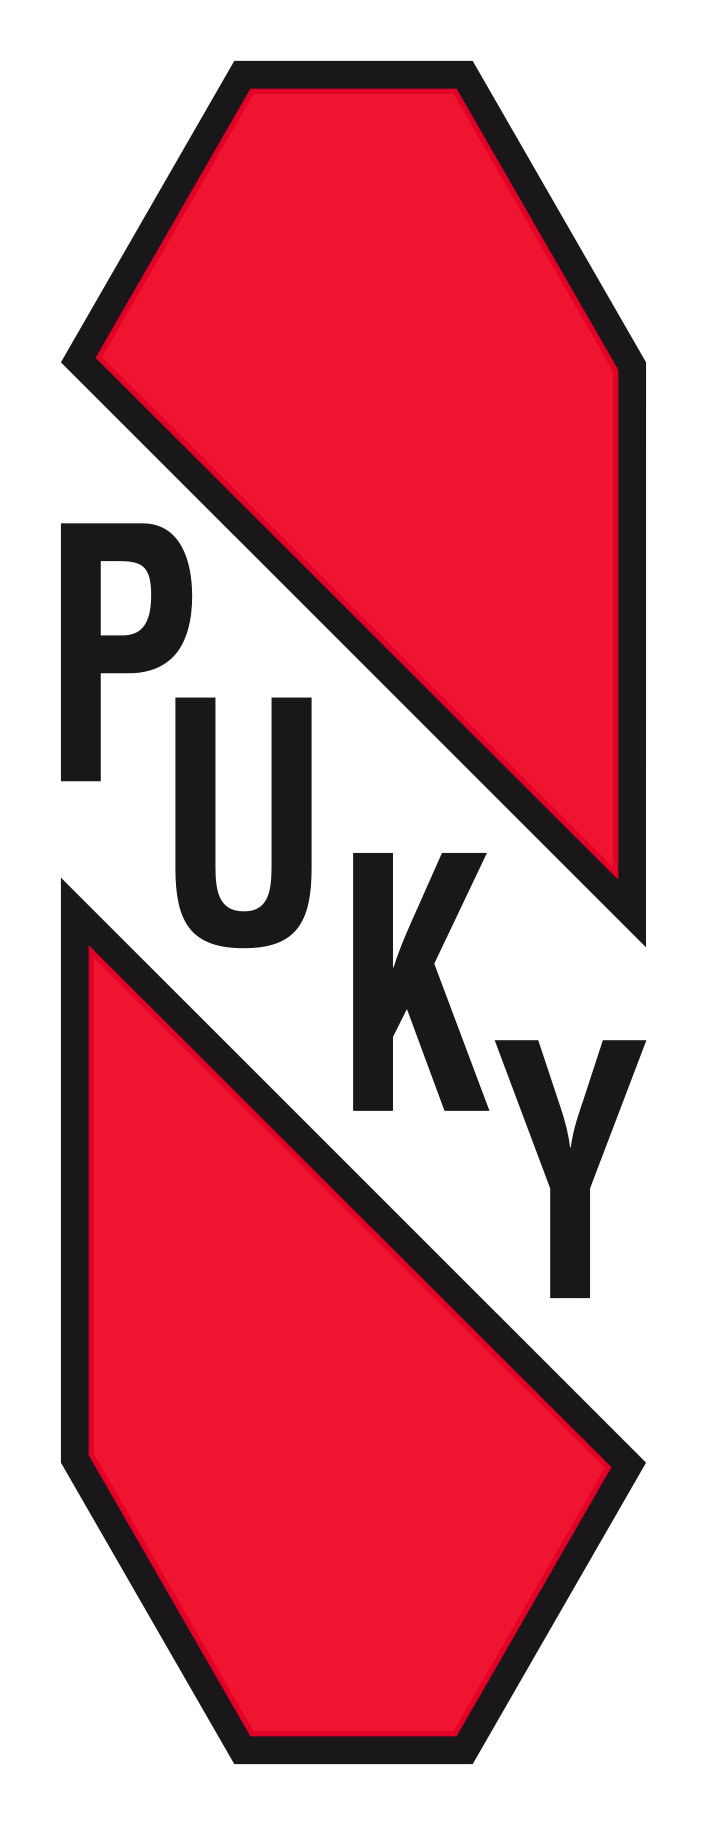 /images/brands/puky-logo.png